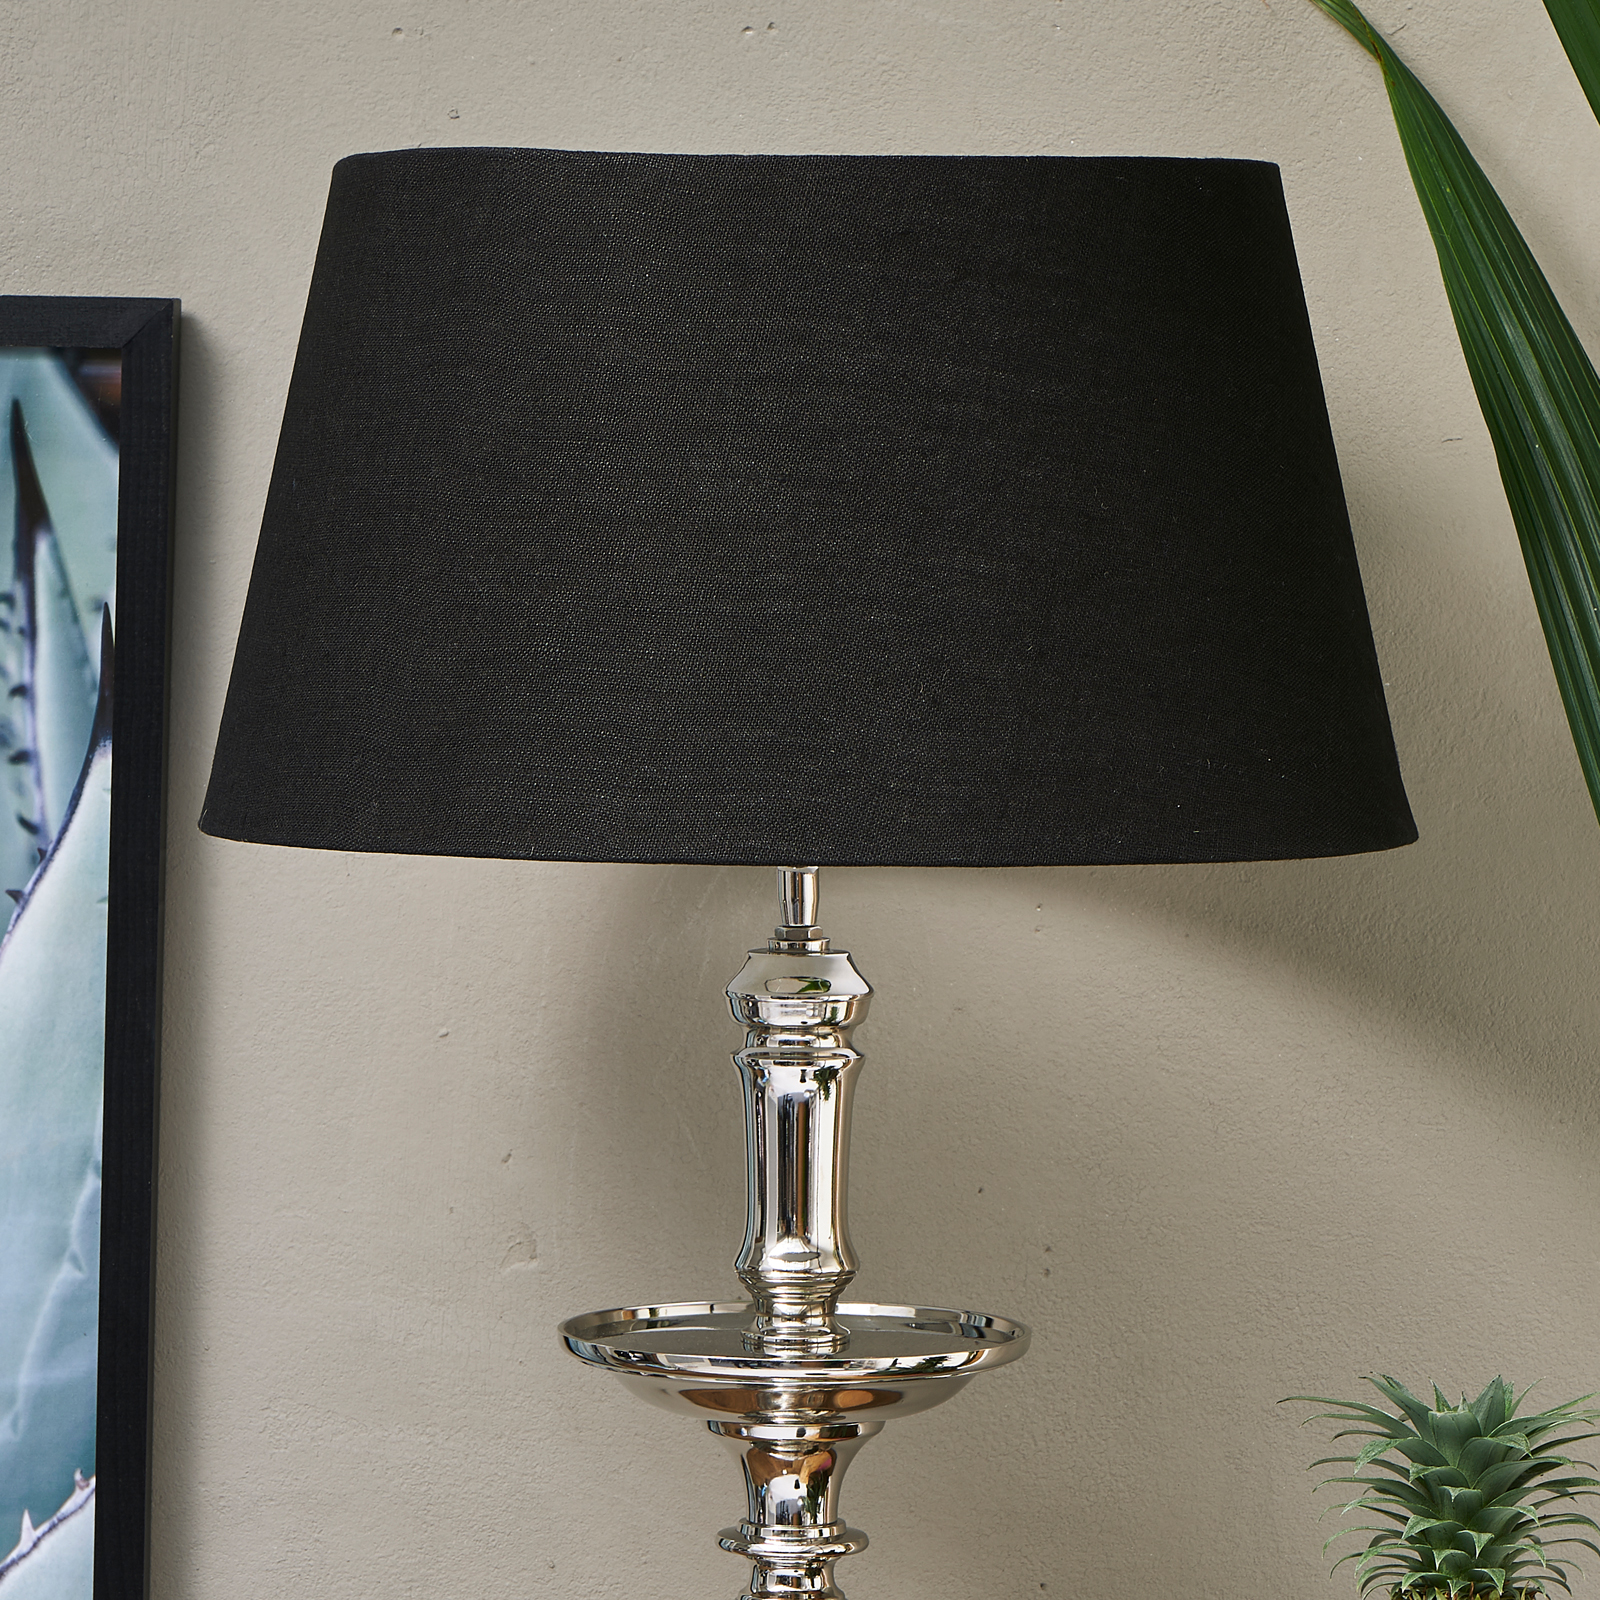 Linen Lampshade all black 35x45